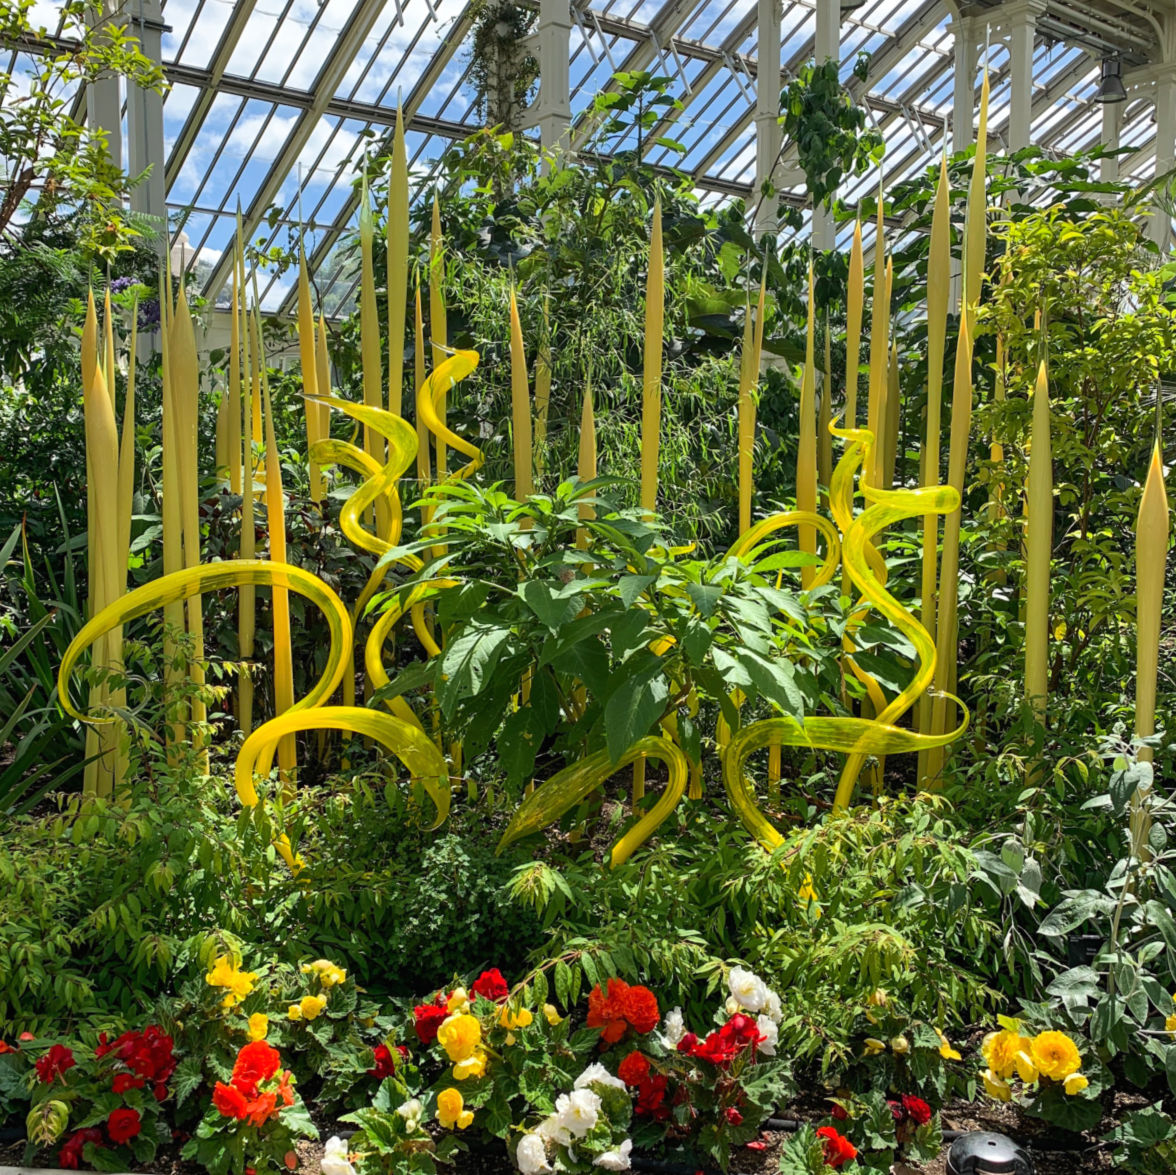 Chihuly sculpture in the Temperate House at Kew Gardens. Details at une femme d'un certain age.